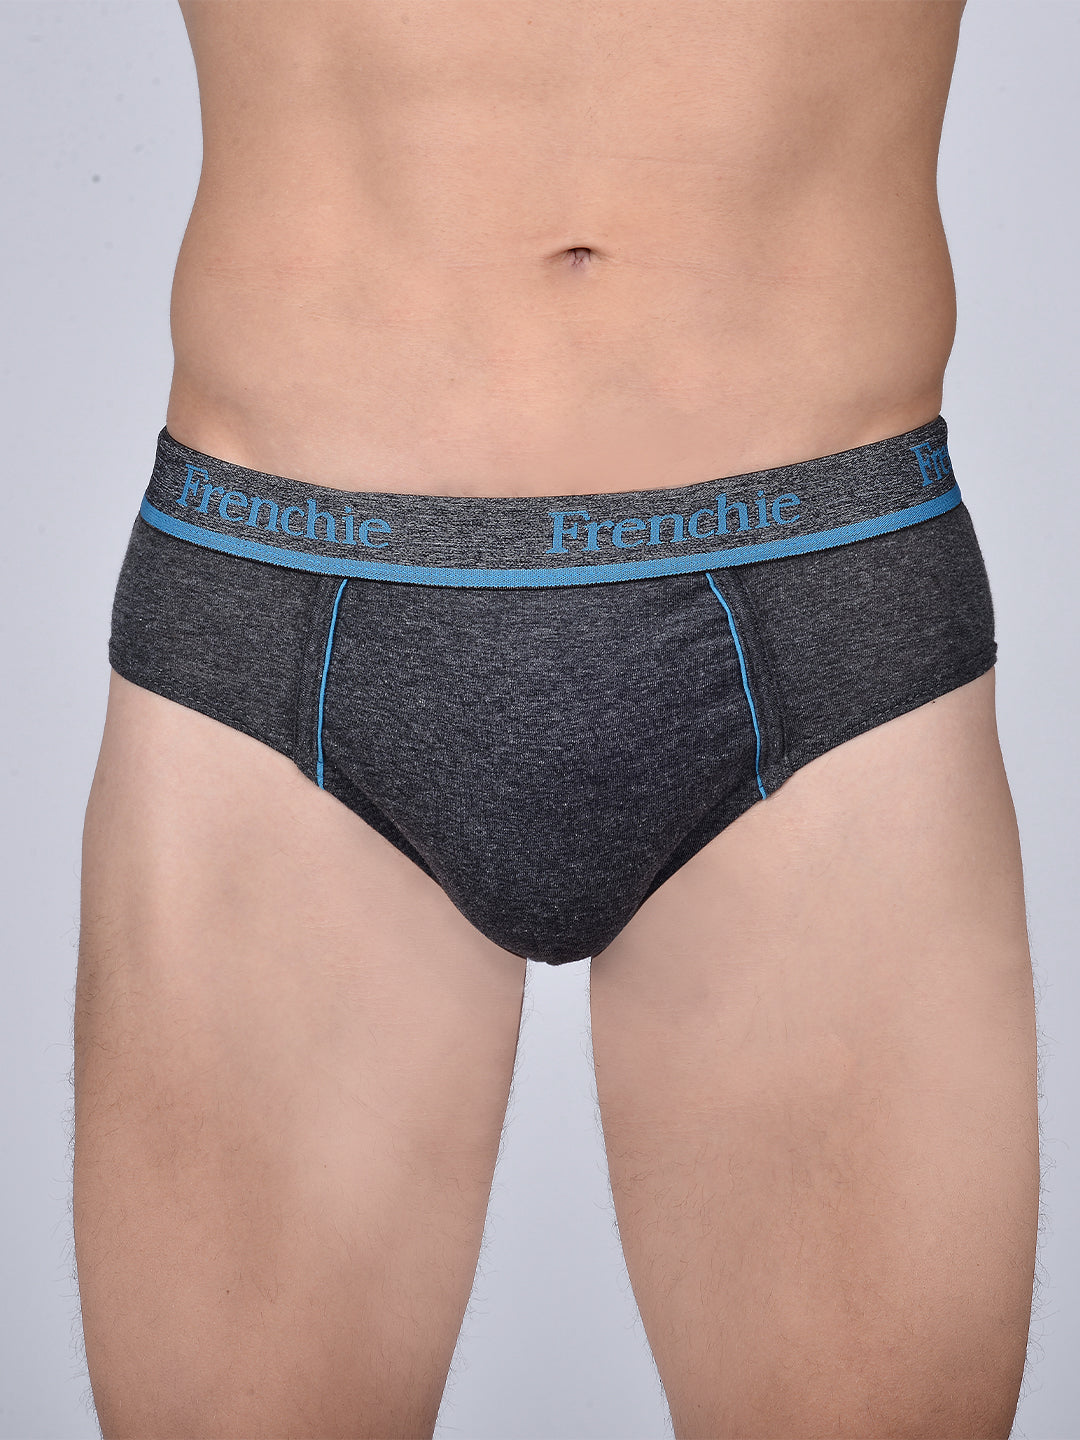 Buy Frenchie Pro Men's Cotton Briefs-Assorted Colours – VIP Clothing Limited